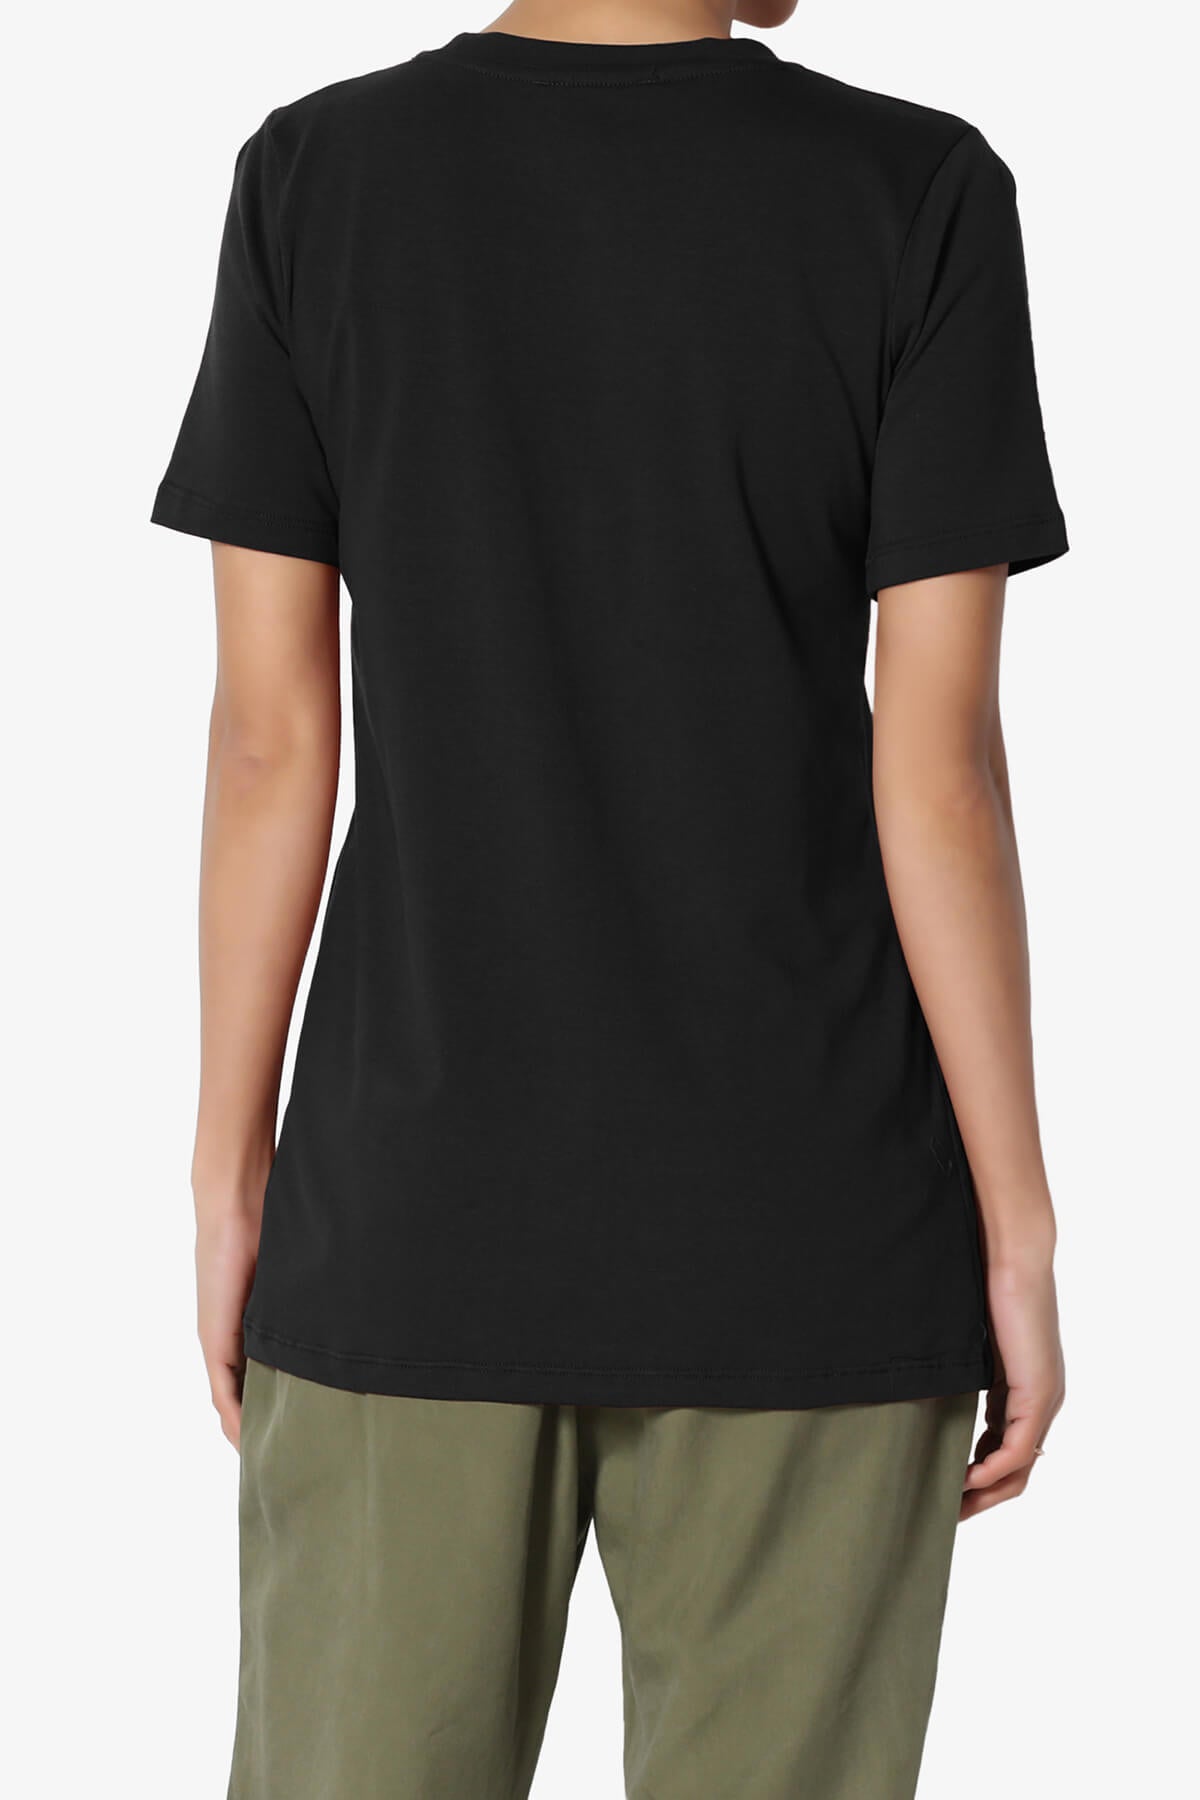 Load image into Gallery viewer, Elora Crew Neck Short Sleeve T-Shirt BLACK_2
